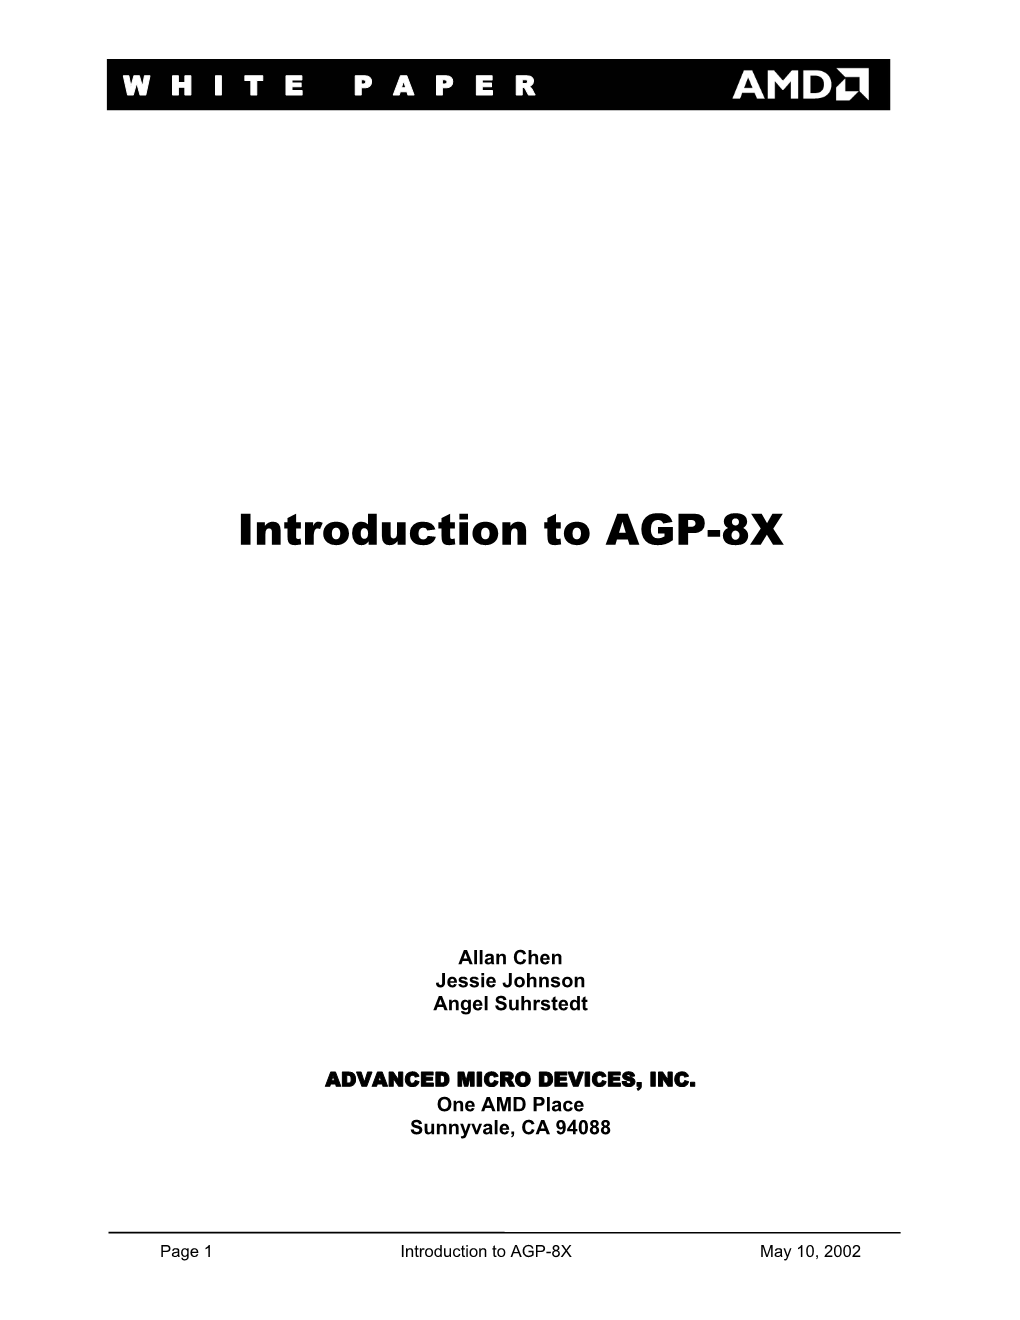 Introduction to AGP-8X